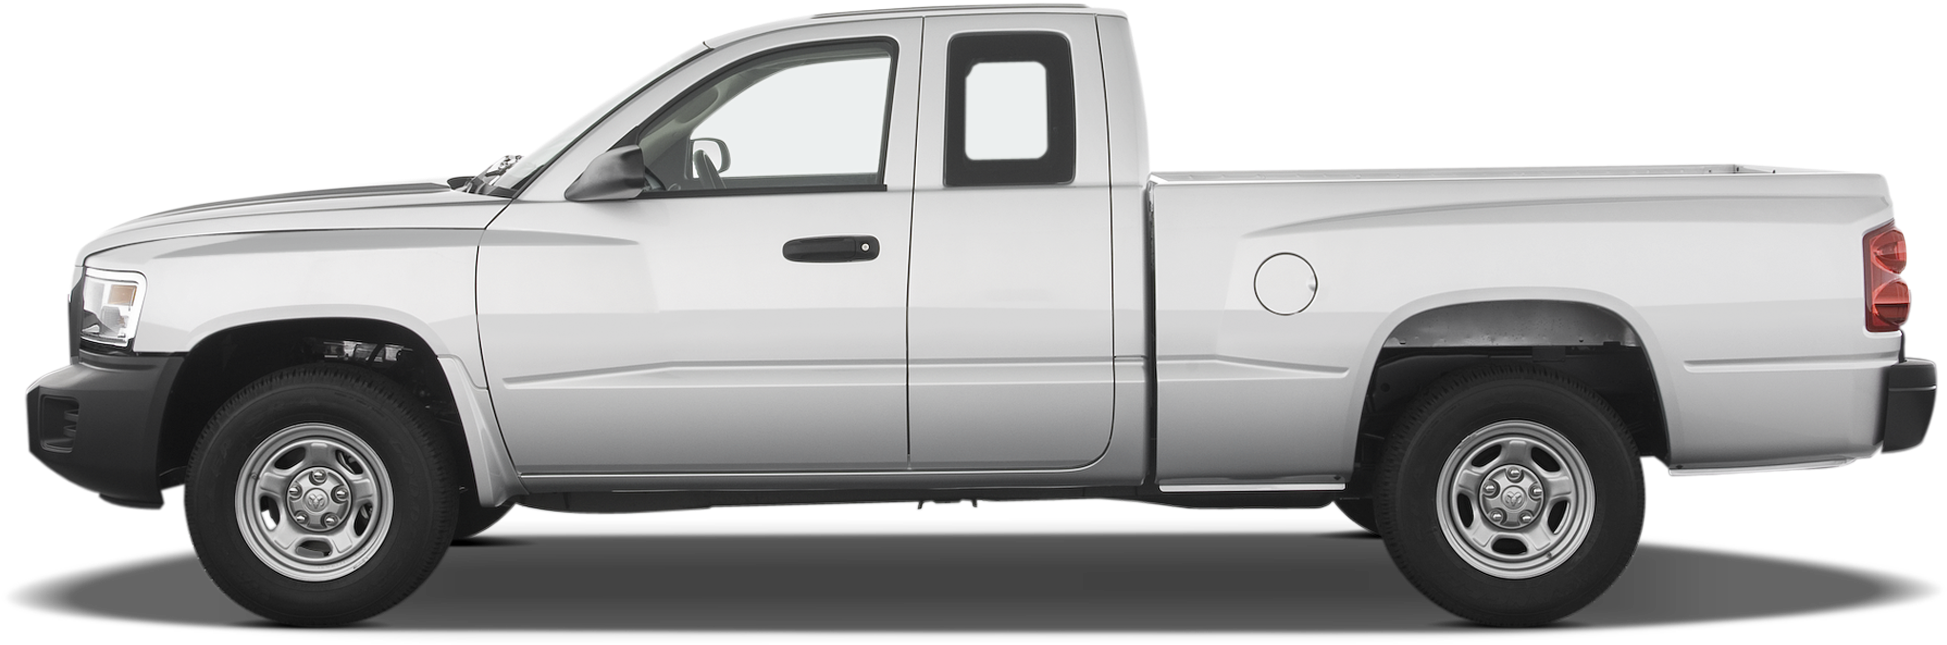 Dodge Truck PNG Images HD